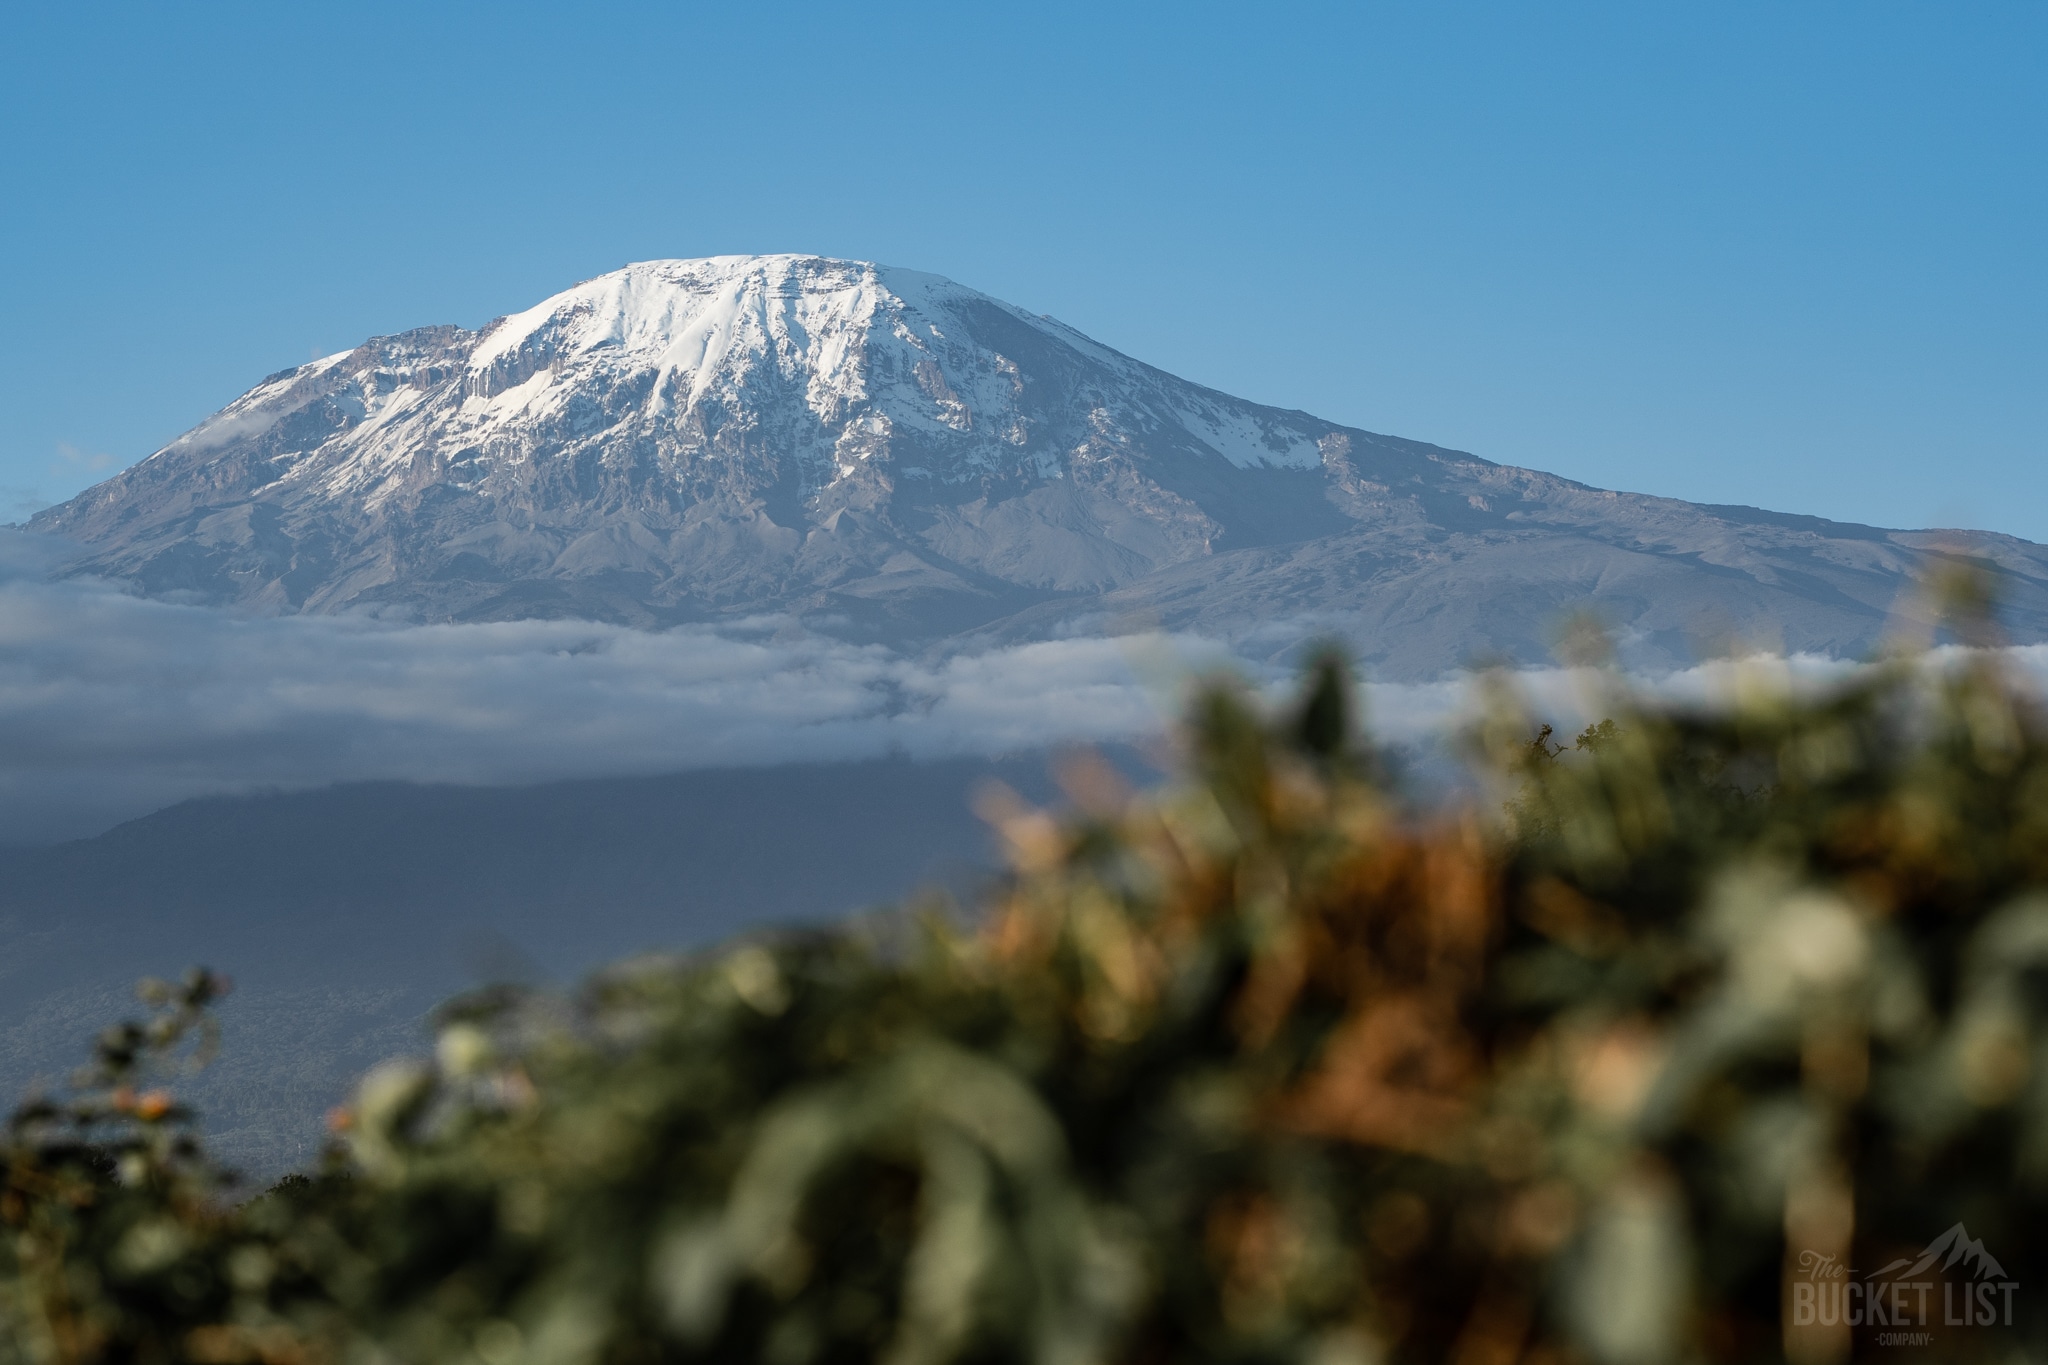 How Difficult is it to Climb Kilimanjaro?